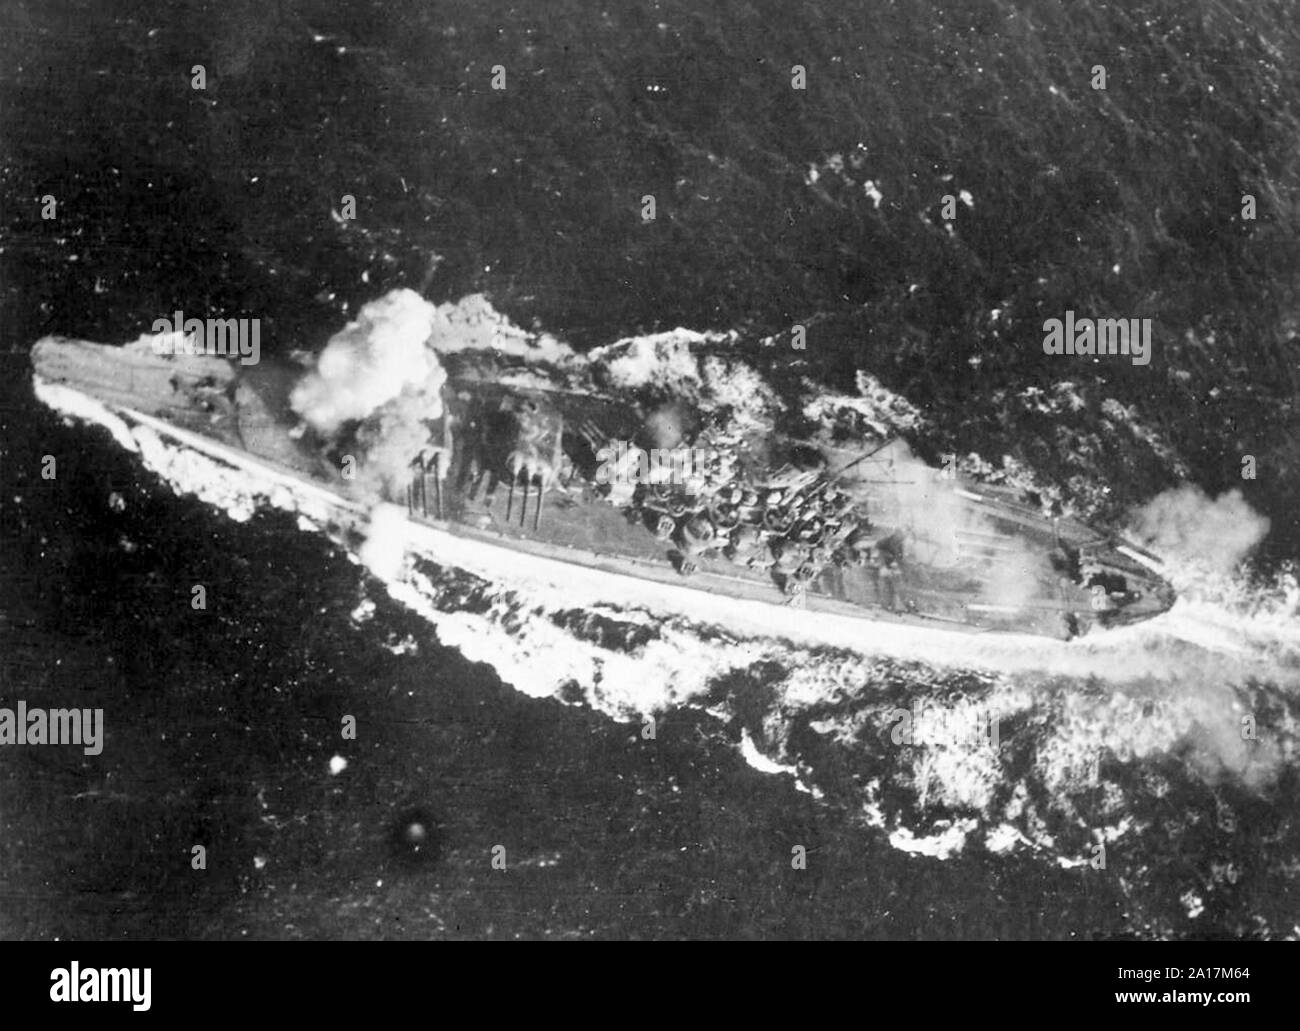 Battle of the Sibuyan Sea (24 October 1944) Battle of Leyte Gulf, Yamato hit by a bomb near her forward gun turret in the Sibuyan Sea, 24 October 1944 Stock Photo